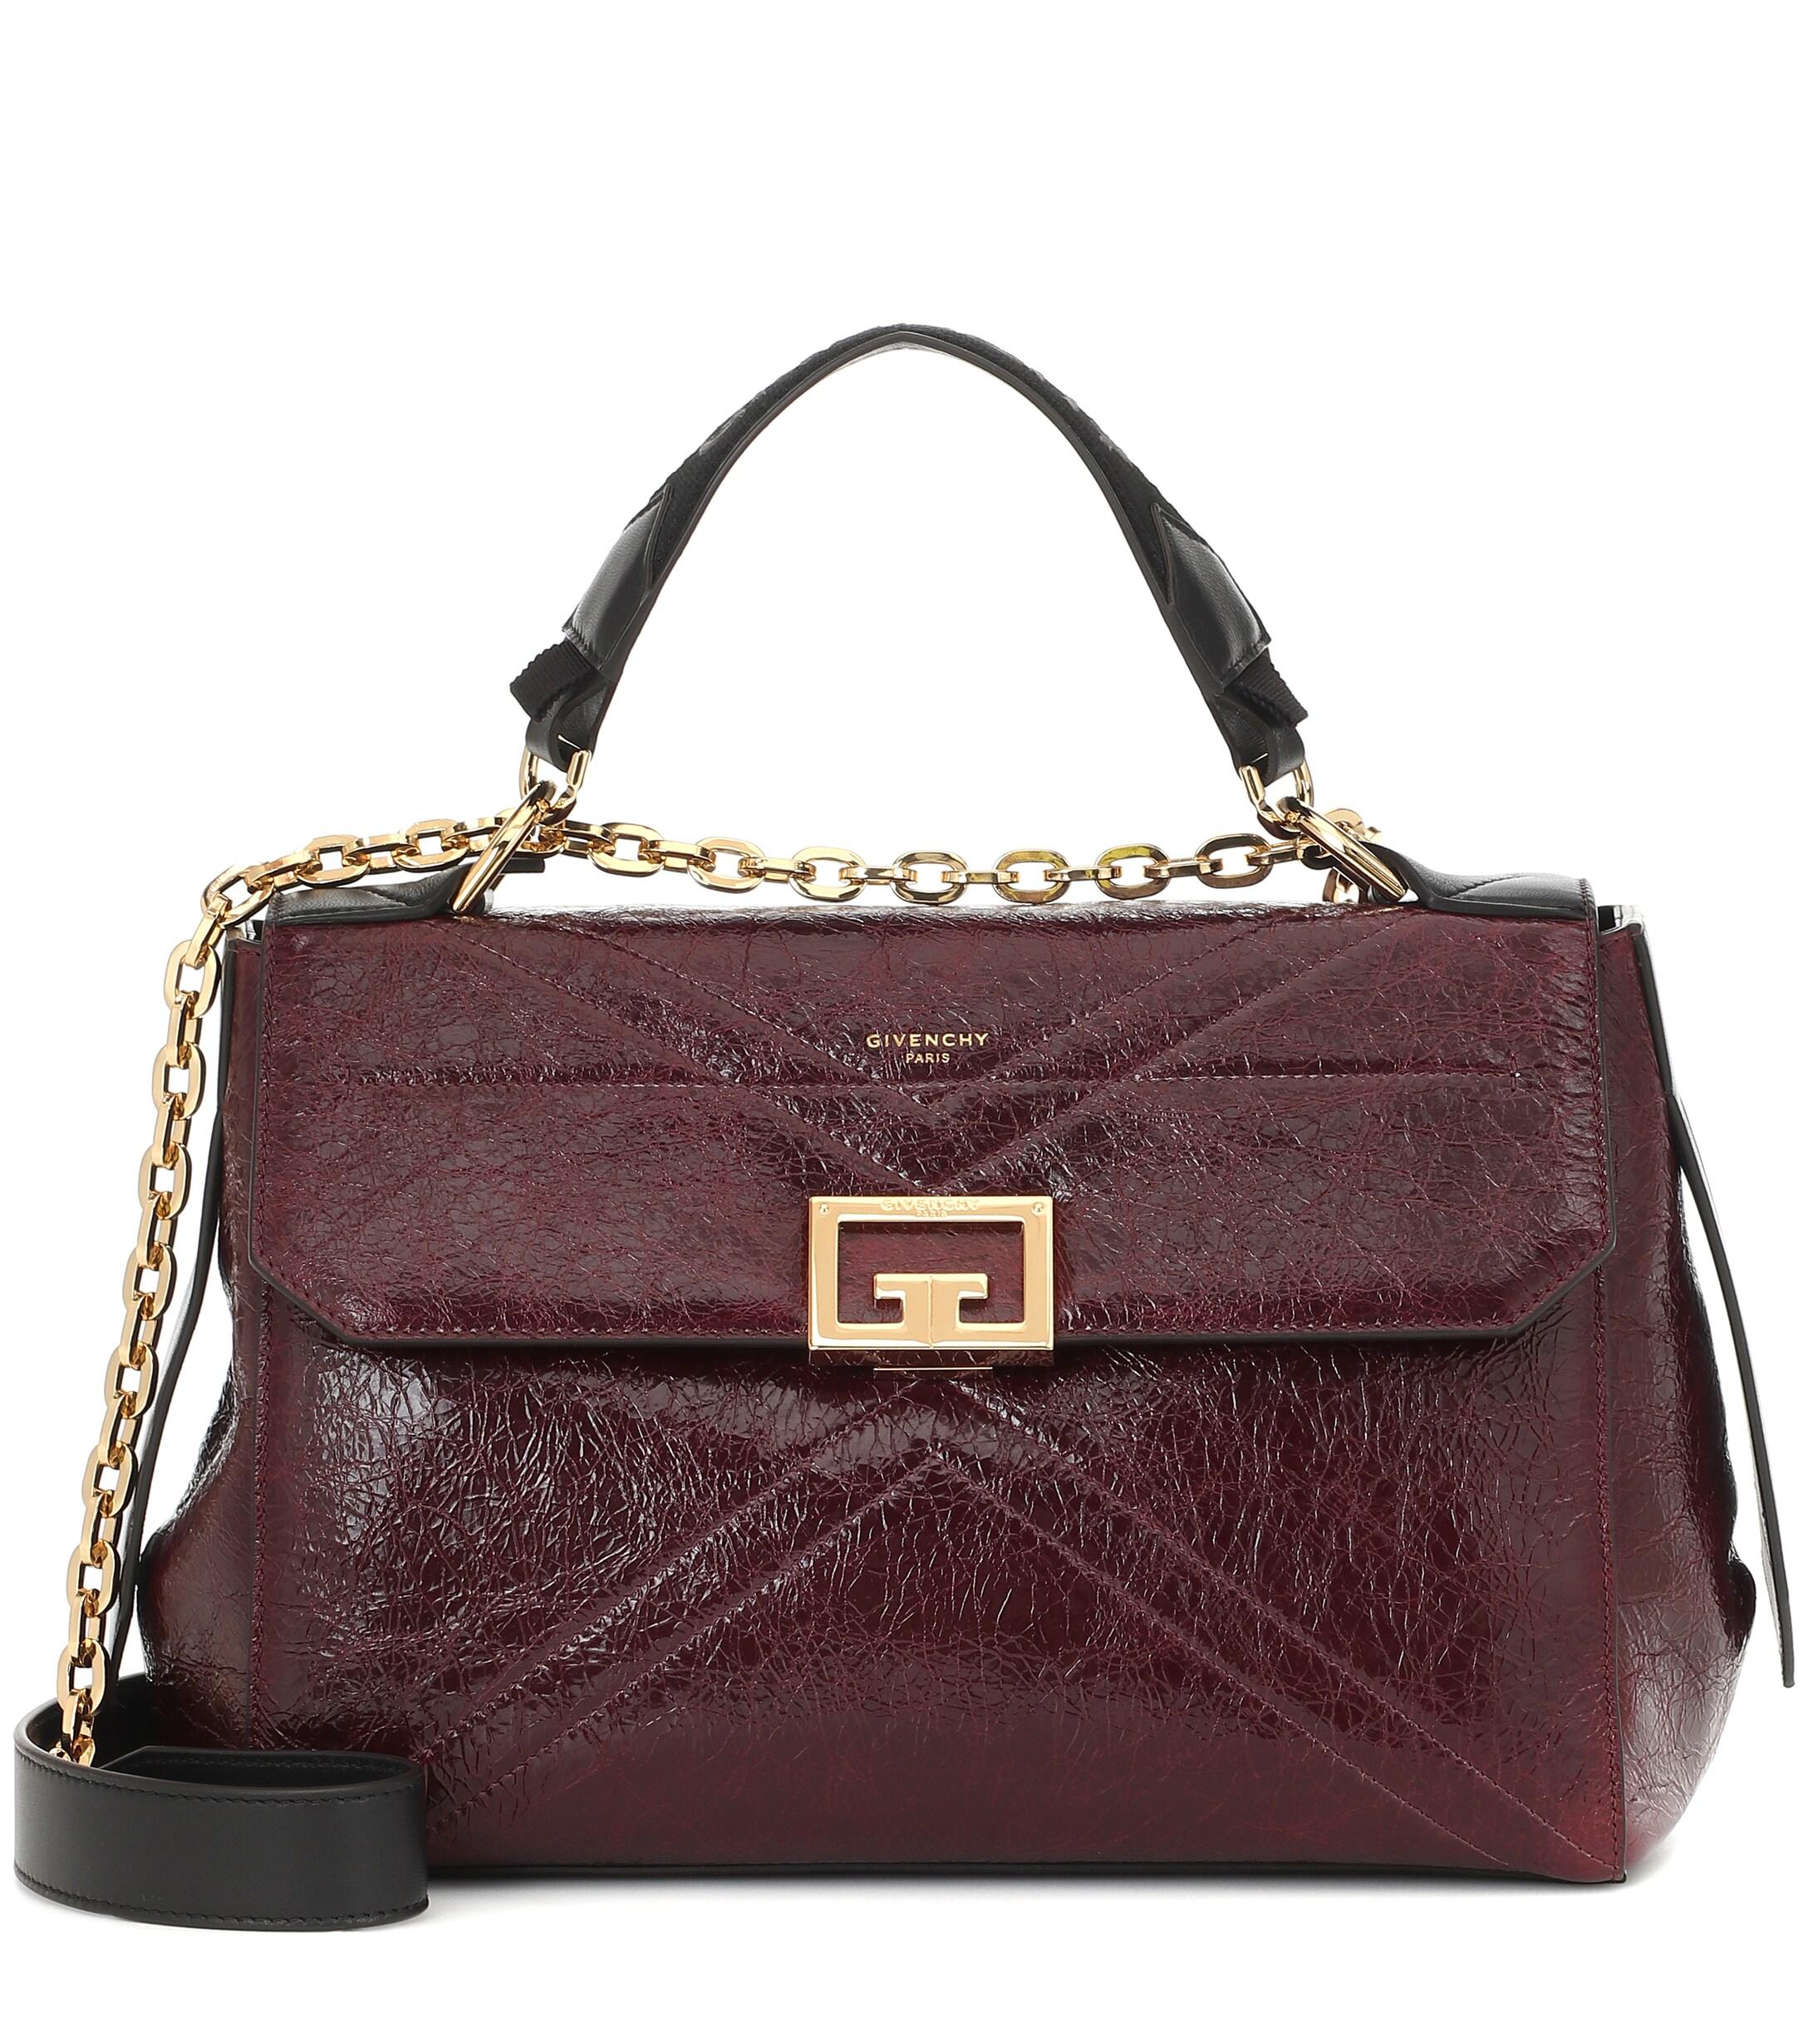 Givenchy Id Medium Leather Shoulder Bag in Purple - Lyst